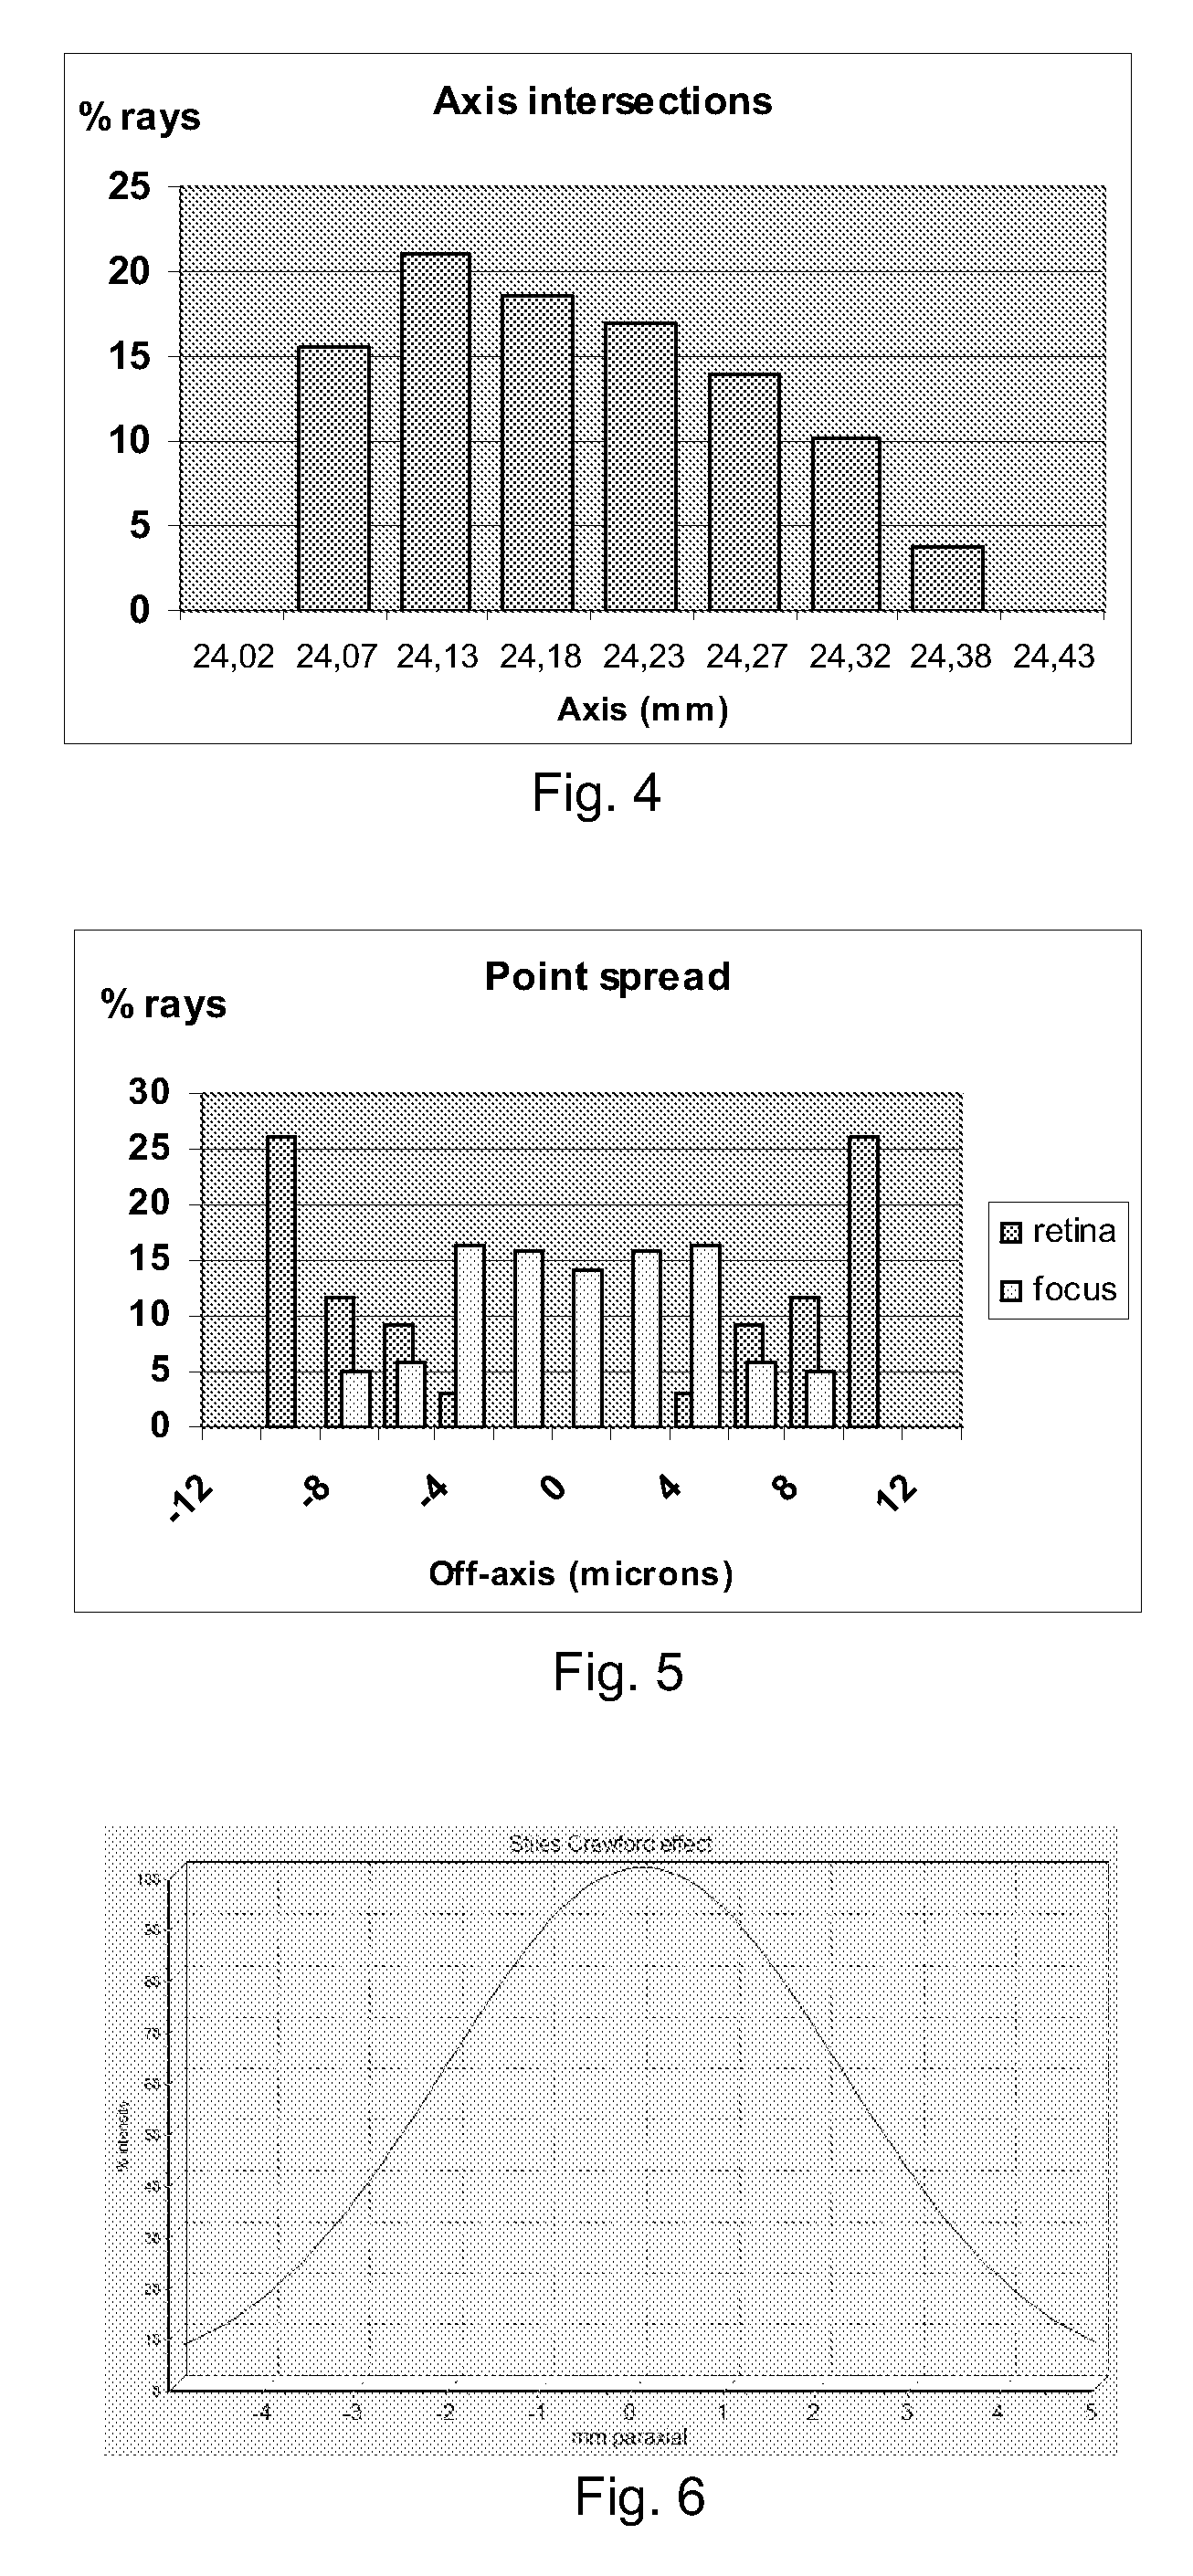 System and method for determining and predicting IOL power in situ